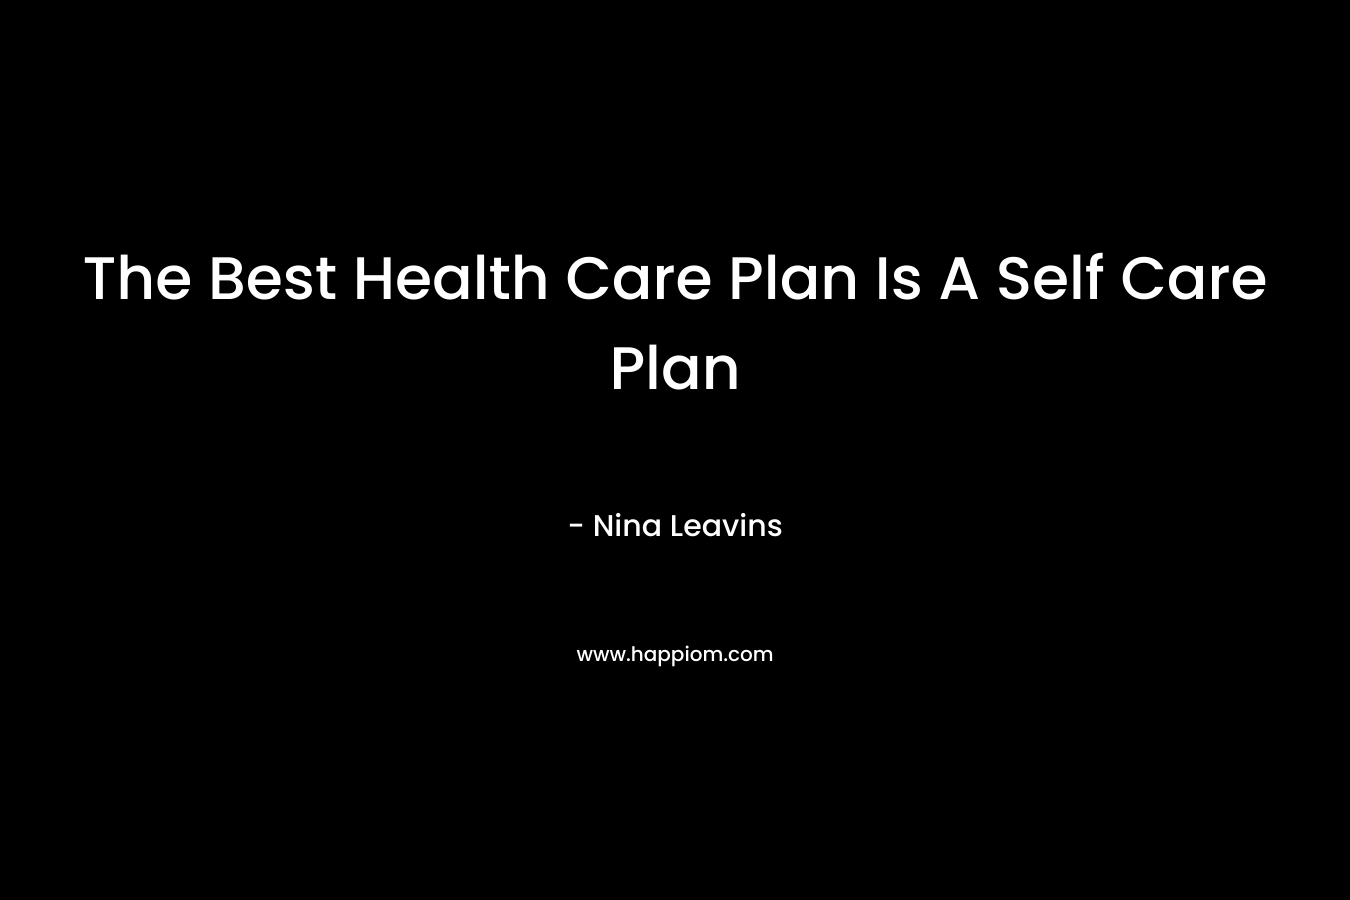 The Best Health Care Plan Is A Self Care Plan